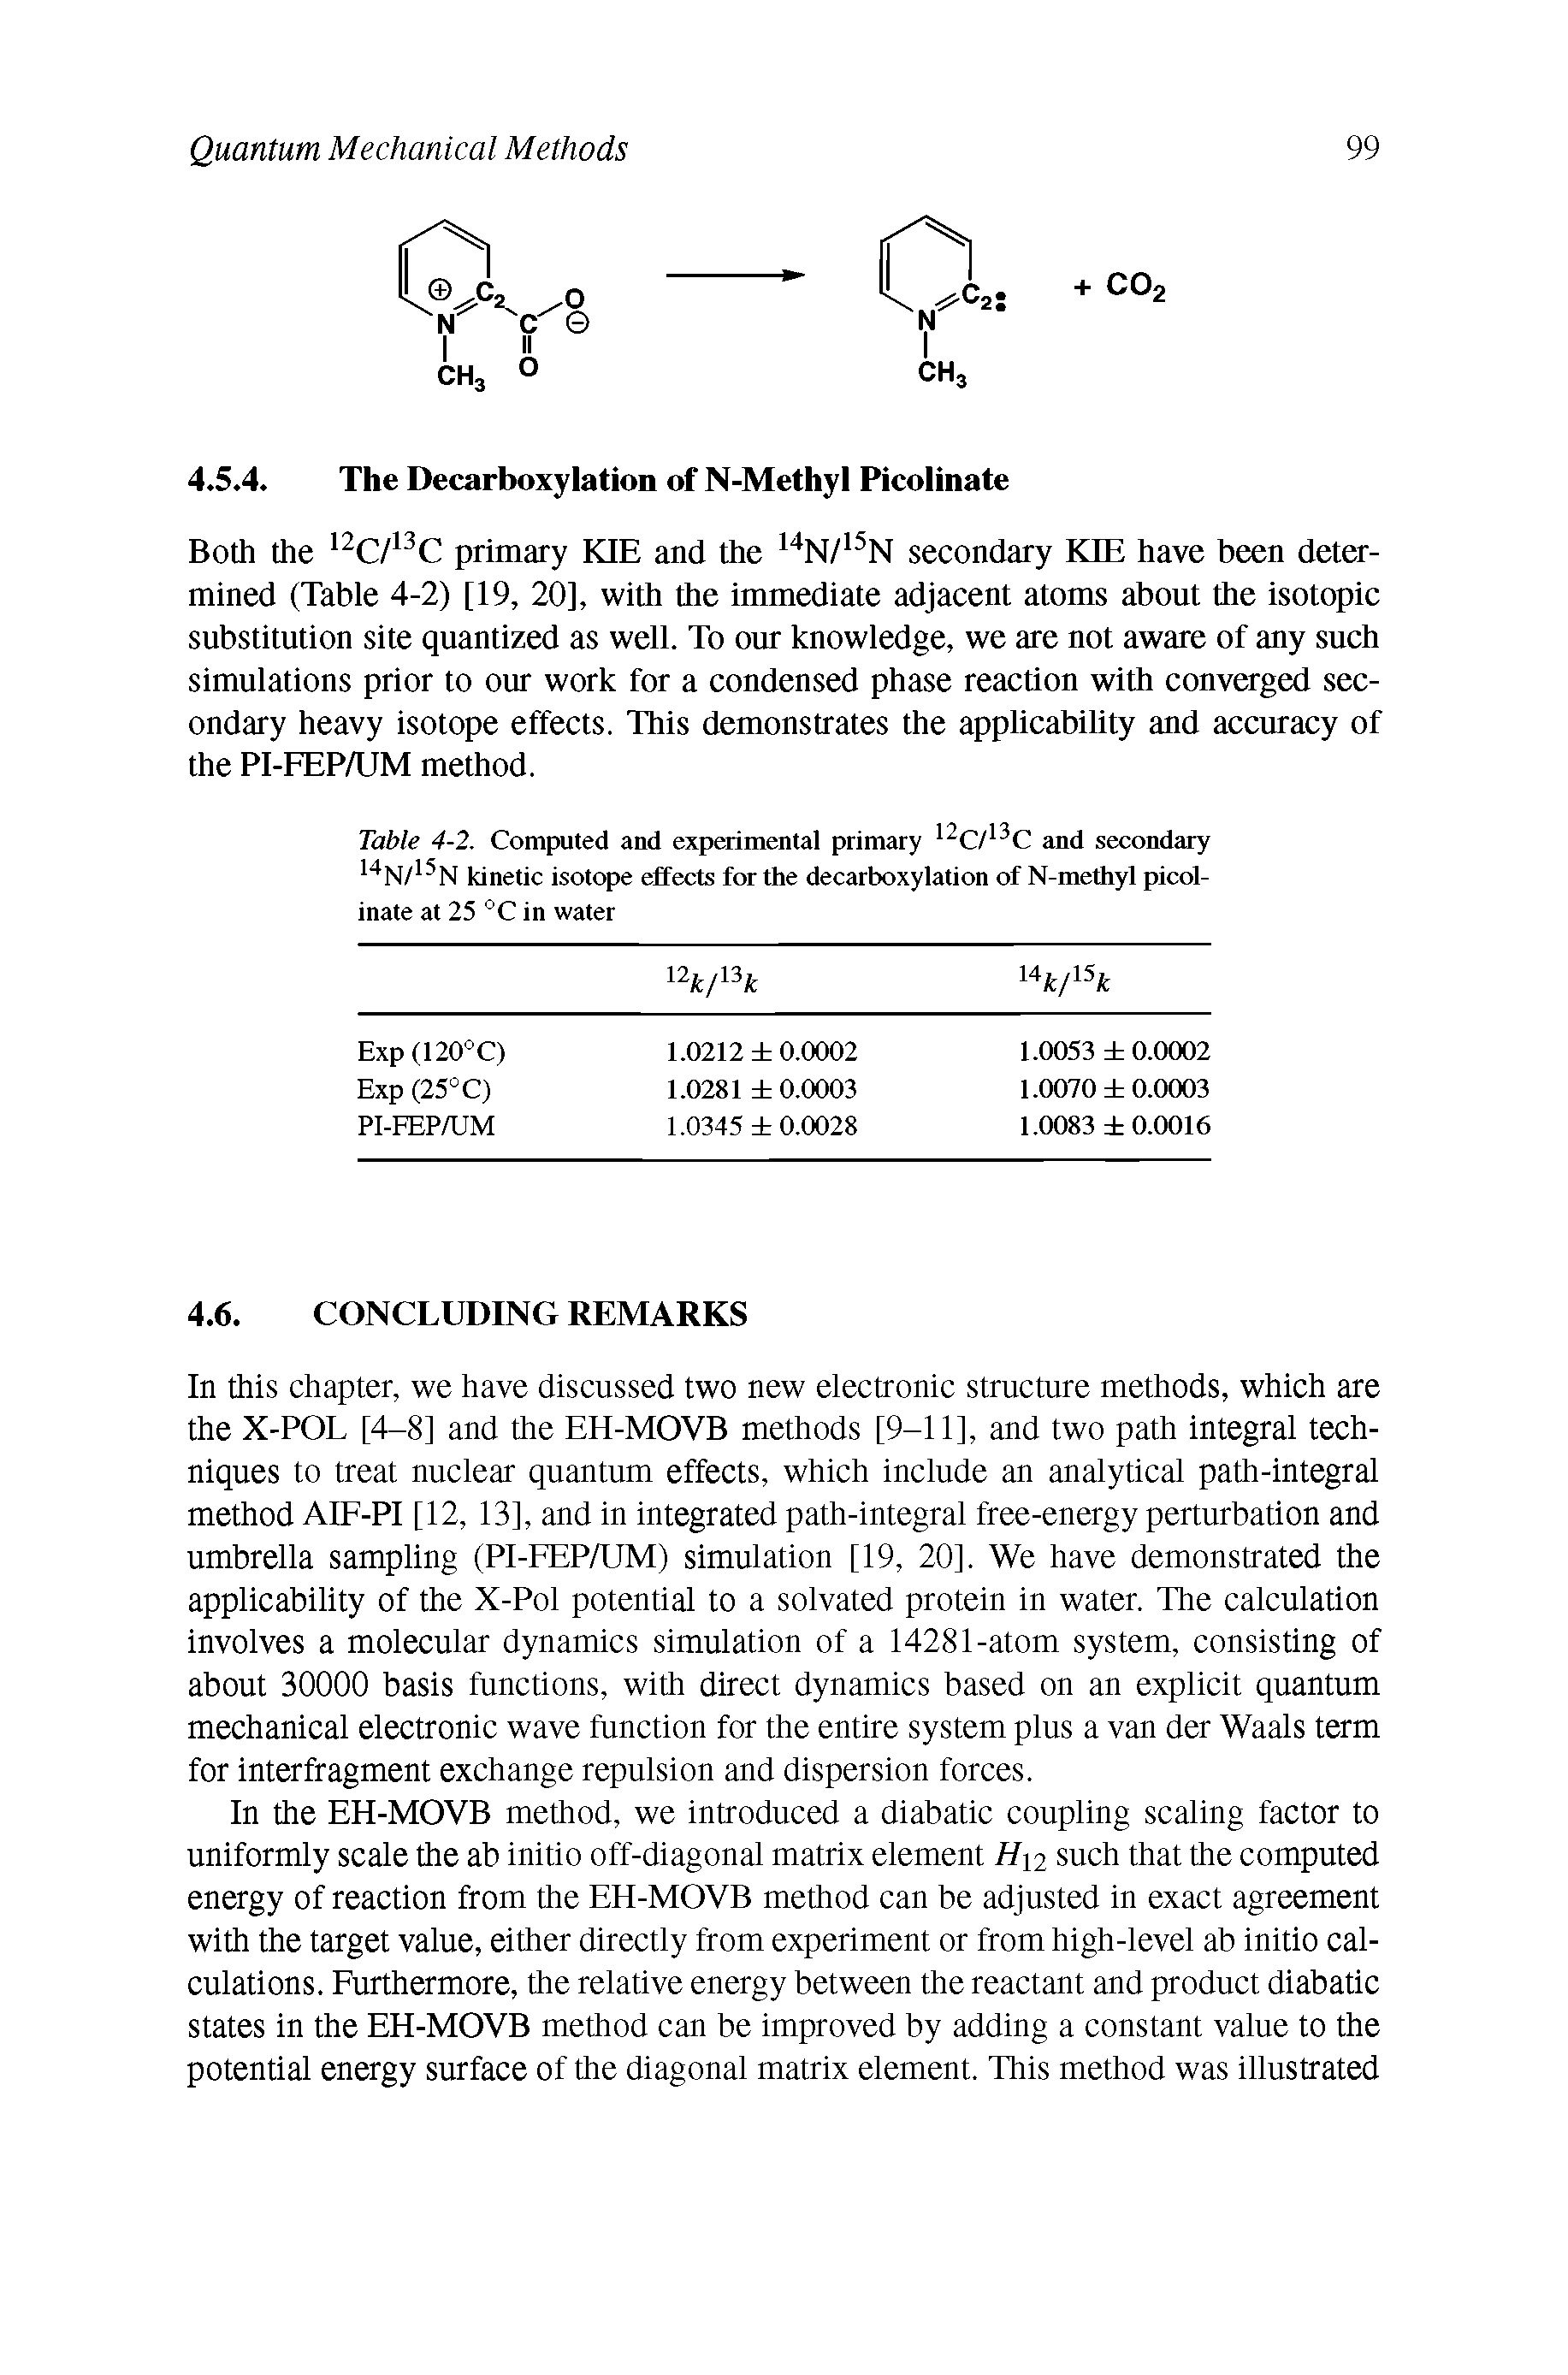 Table 4-2. Computed and experimental primary 12C/13C and secondary 14N/15N kinetic isotope effects for the decarboxylation of N-methyl picolinate at 25 °C in water...